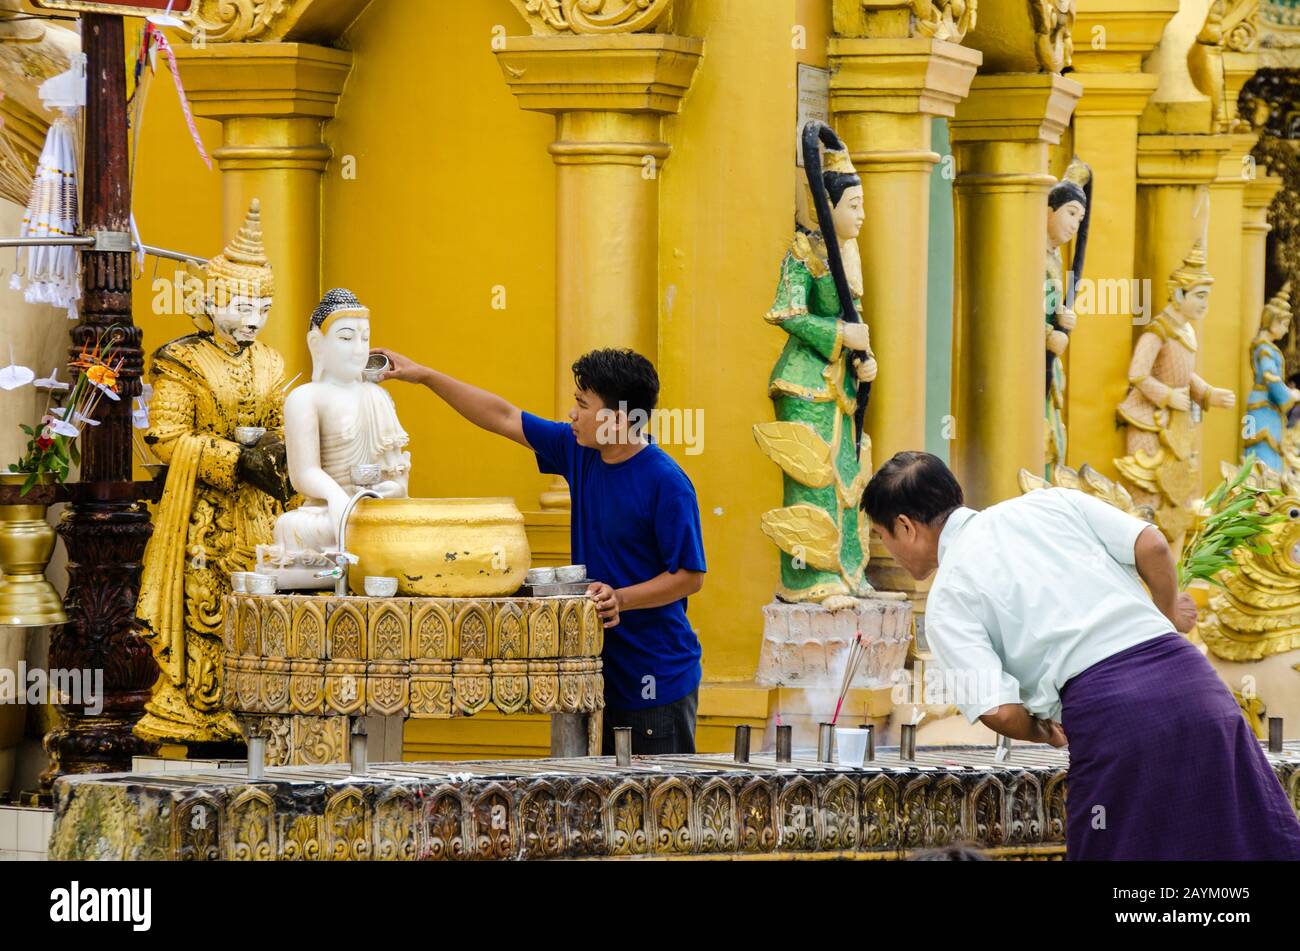 Devotee pours water over the Buddha statue and offer incense at a planetary post, Myanmar Stock Photo